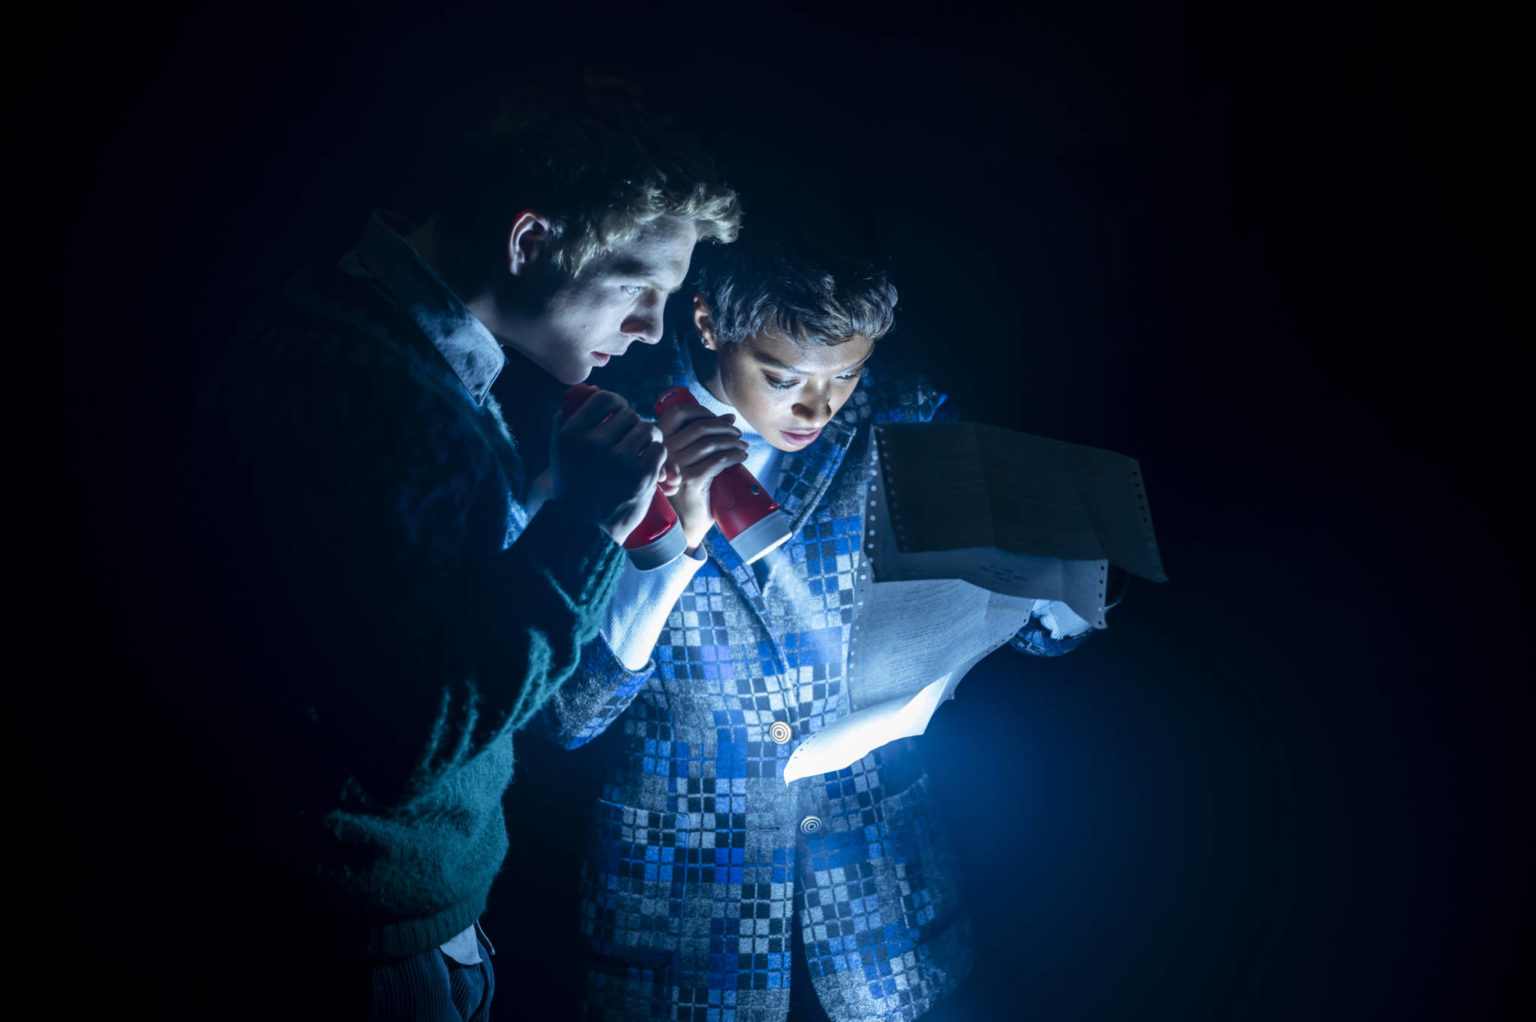 Paul Carpenter (Patrick Gibson) and Sophie Pettingel (Sophie Wilde) together in the darkness of The Bank Of The Dead reviewing a letter with a torch